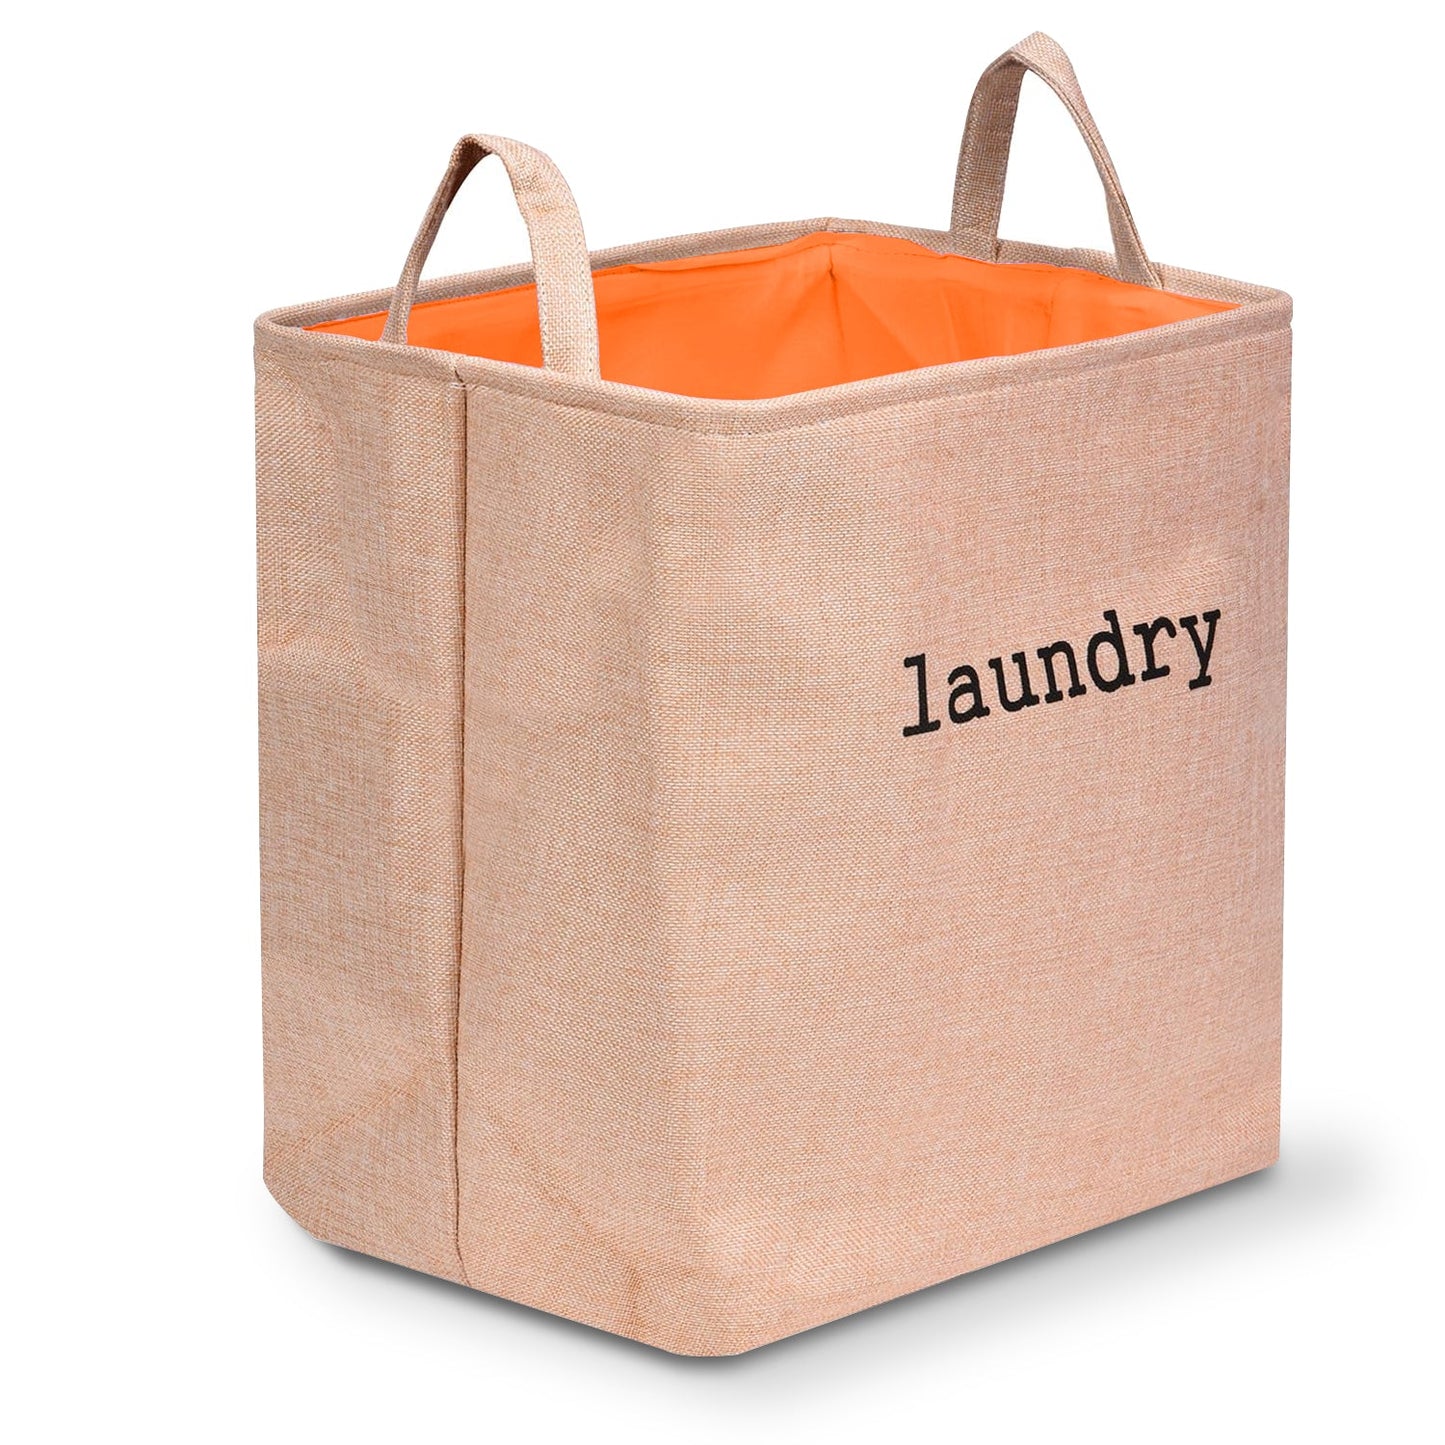  laundry Bag Easy to carry cloth bin